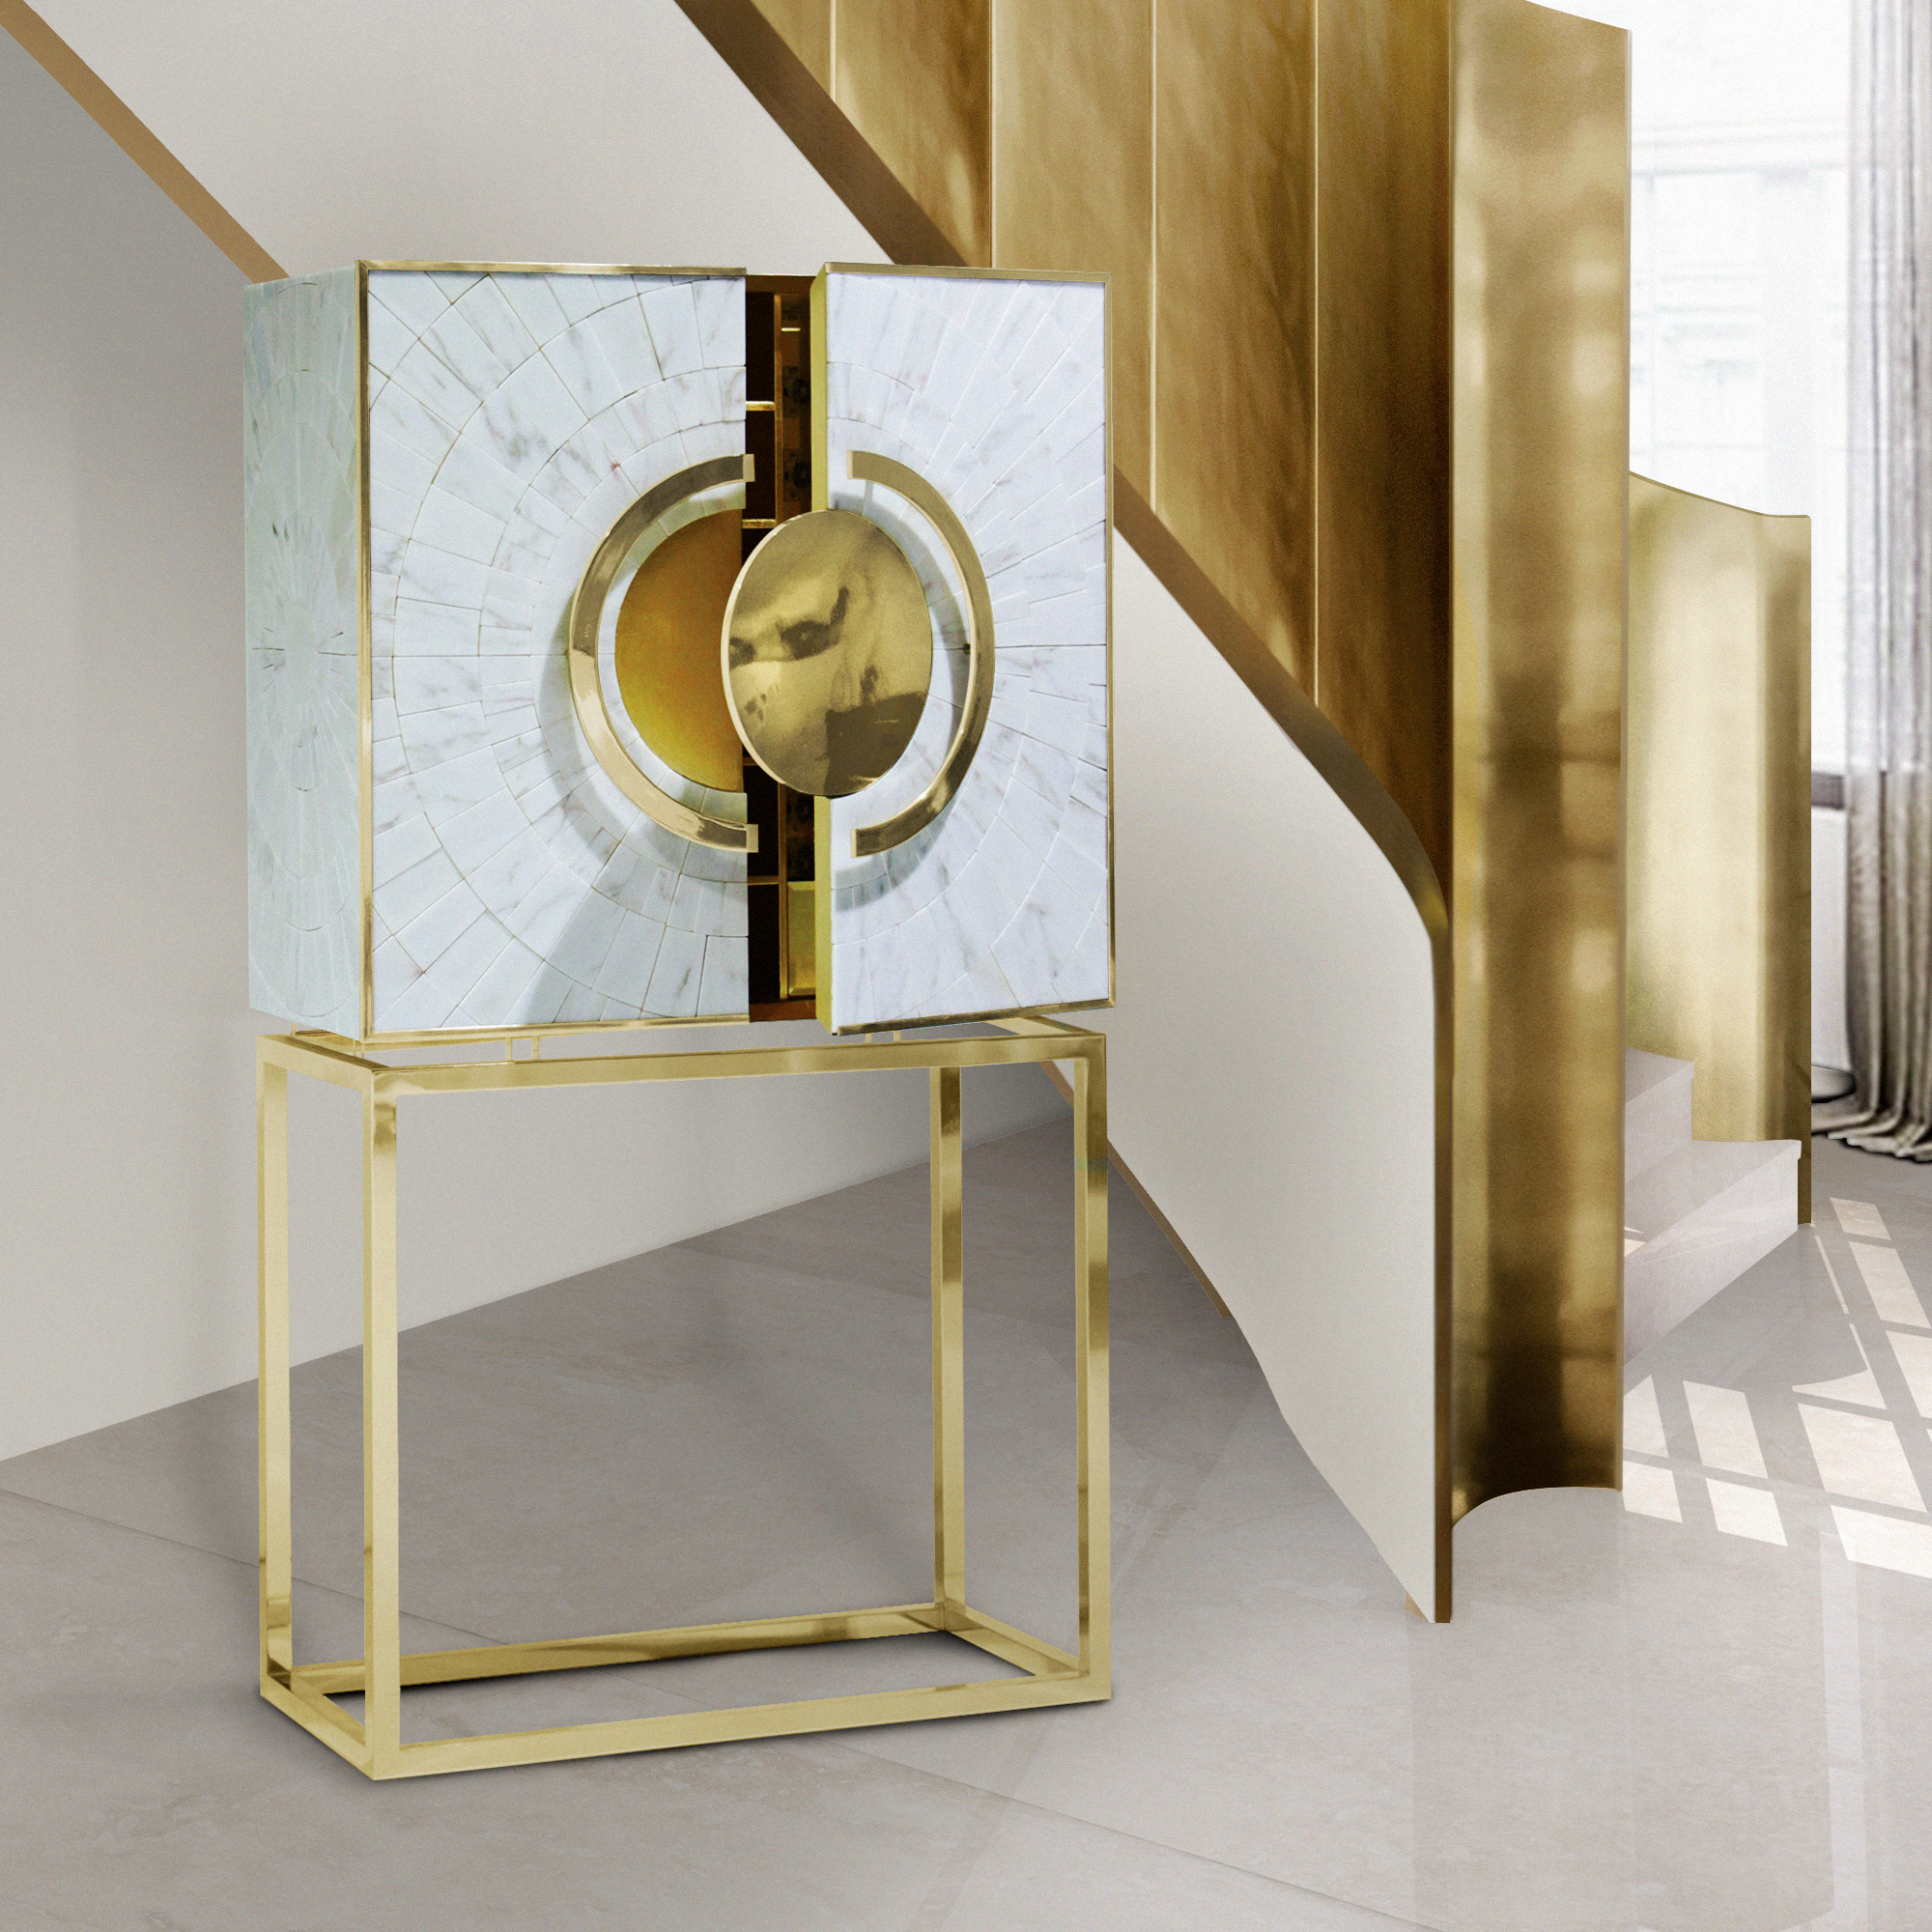 Exclusive Marble Art Deco Inspired Contemporary Cabinet